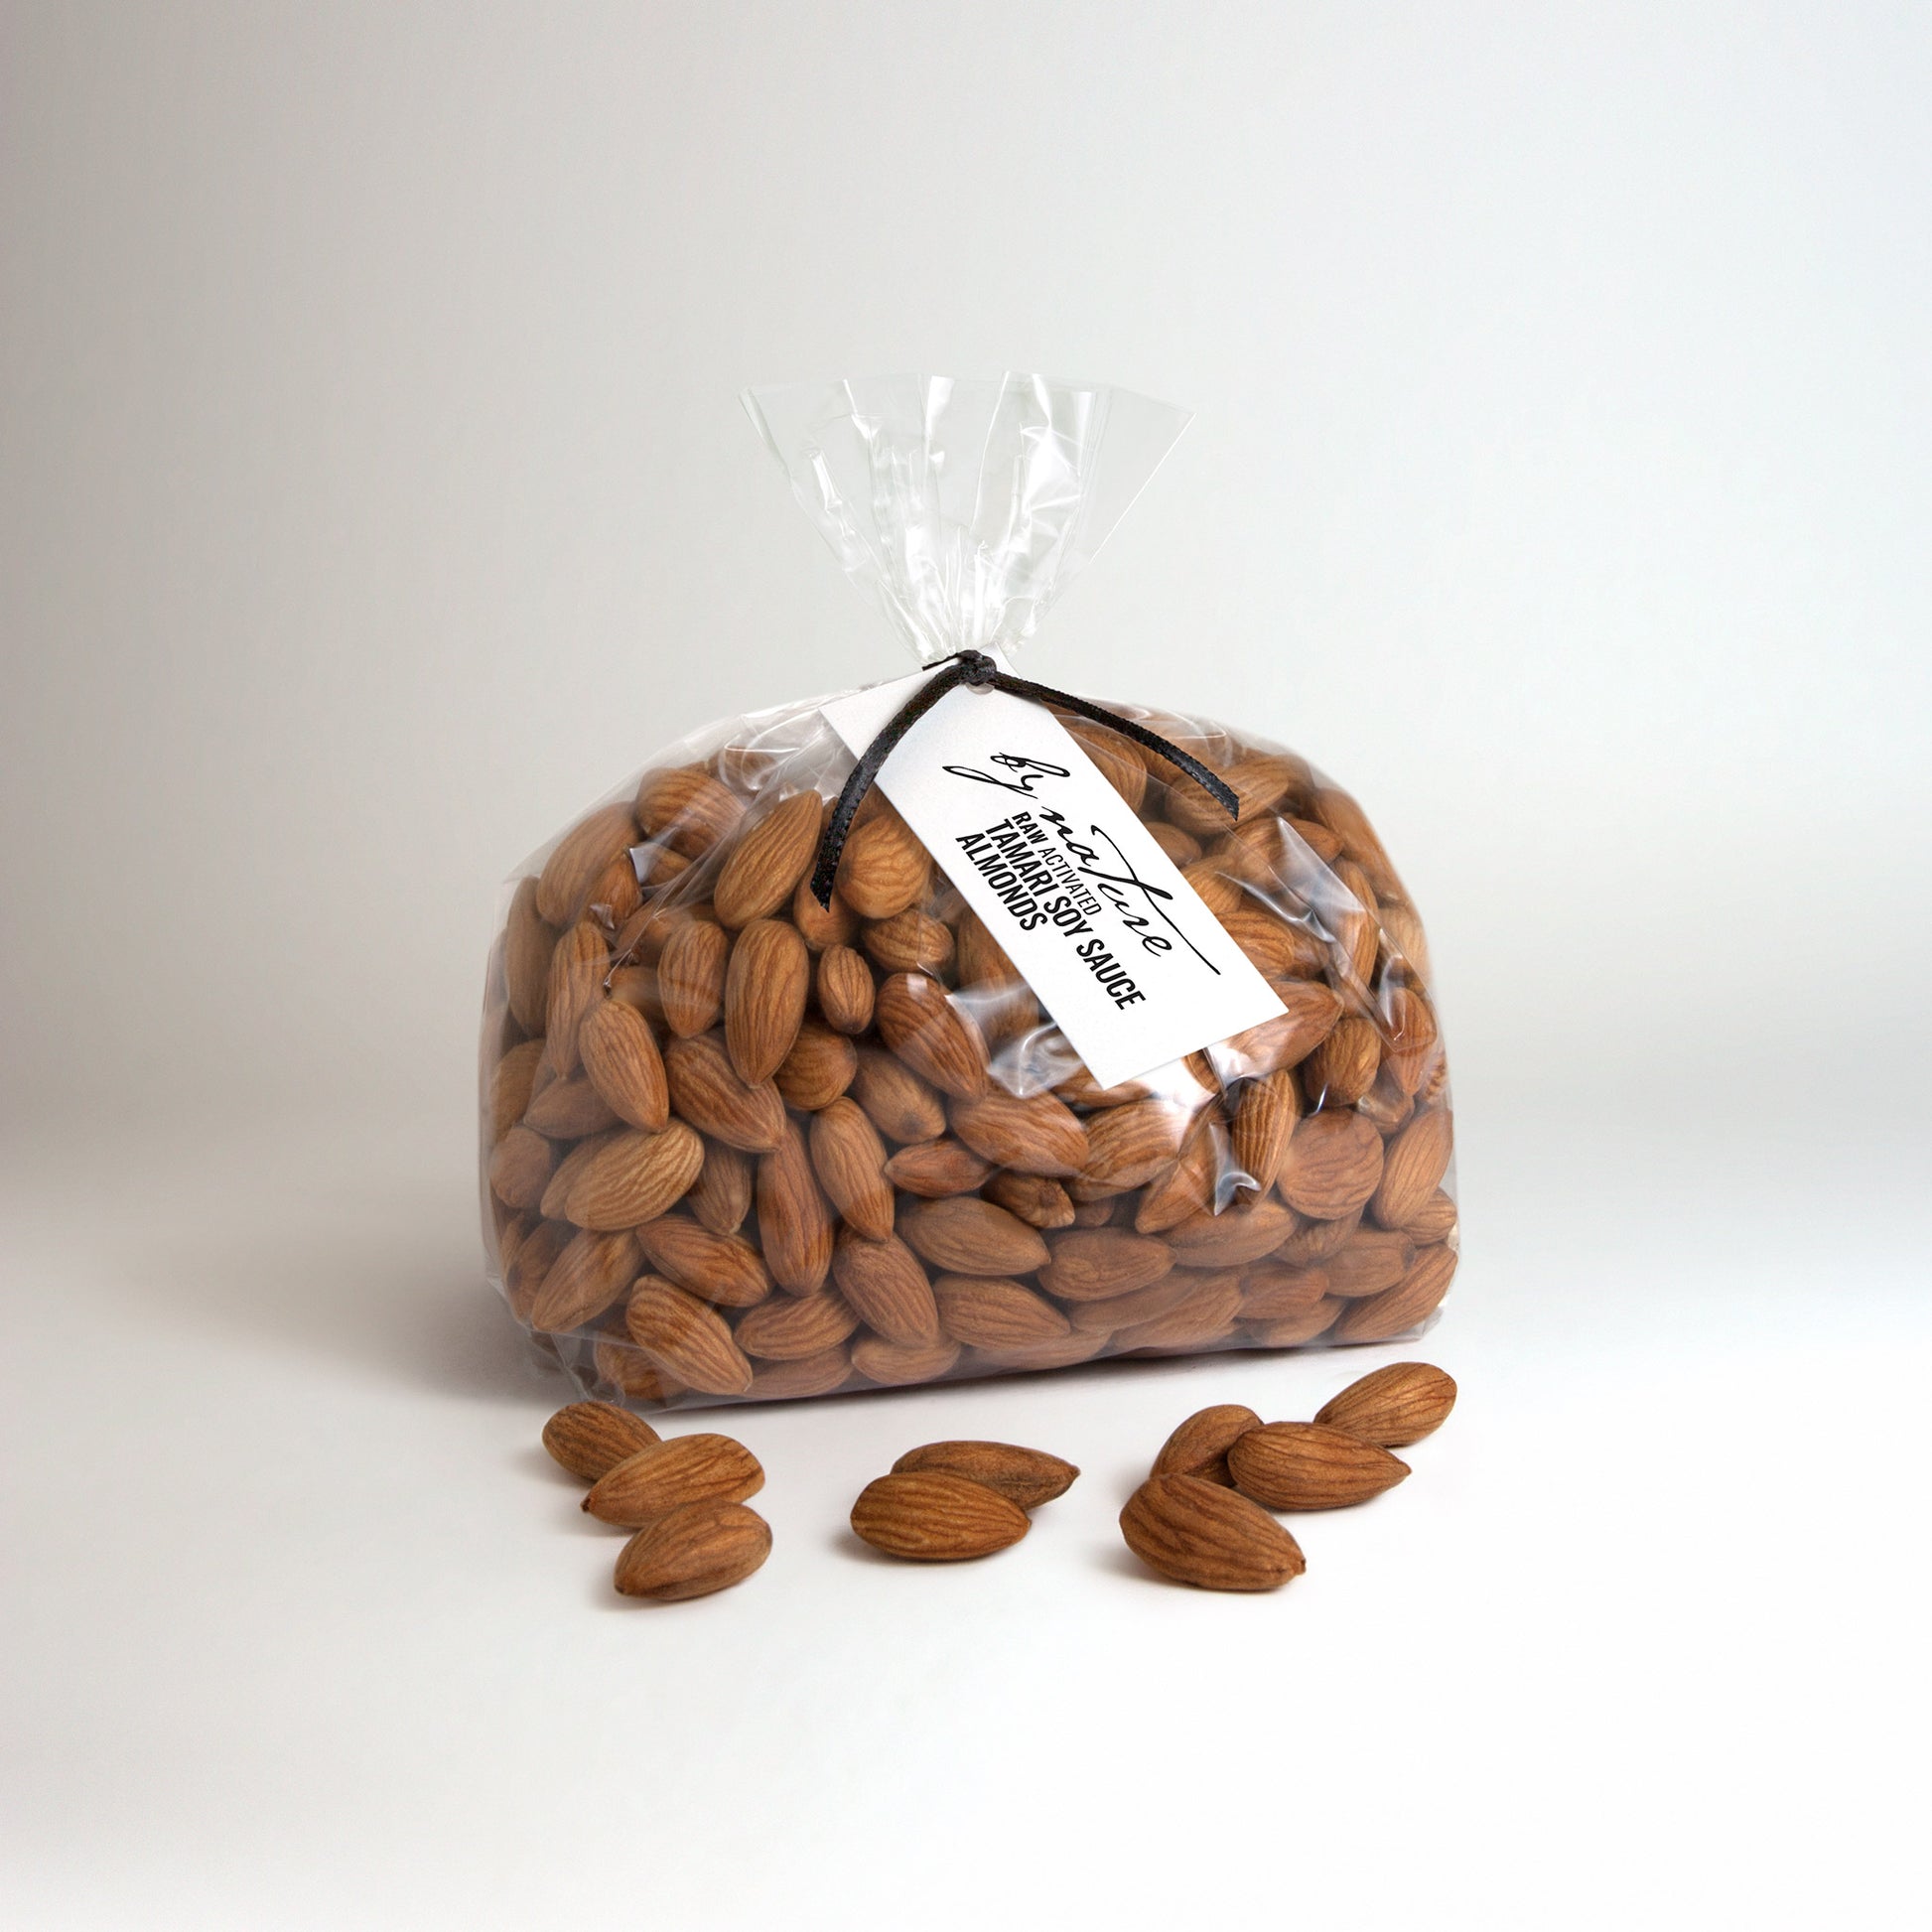 BY NATURE Tamari Soy Sauce Almonds, 500g - raw, activated, dried not roasted.